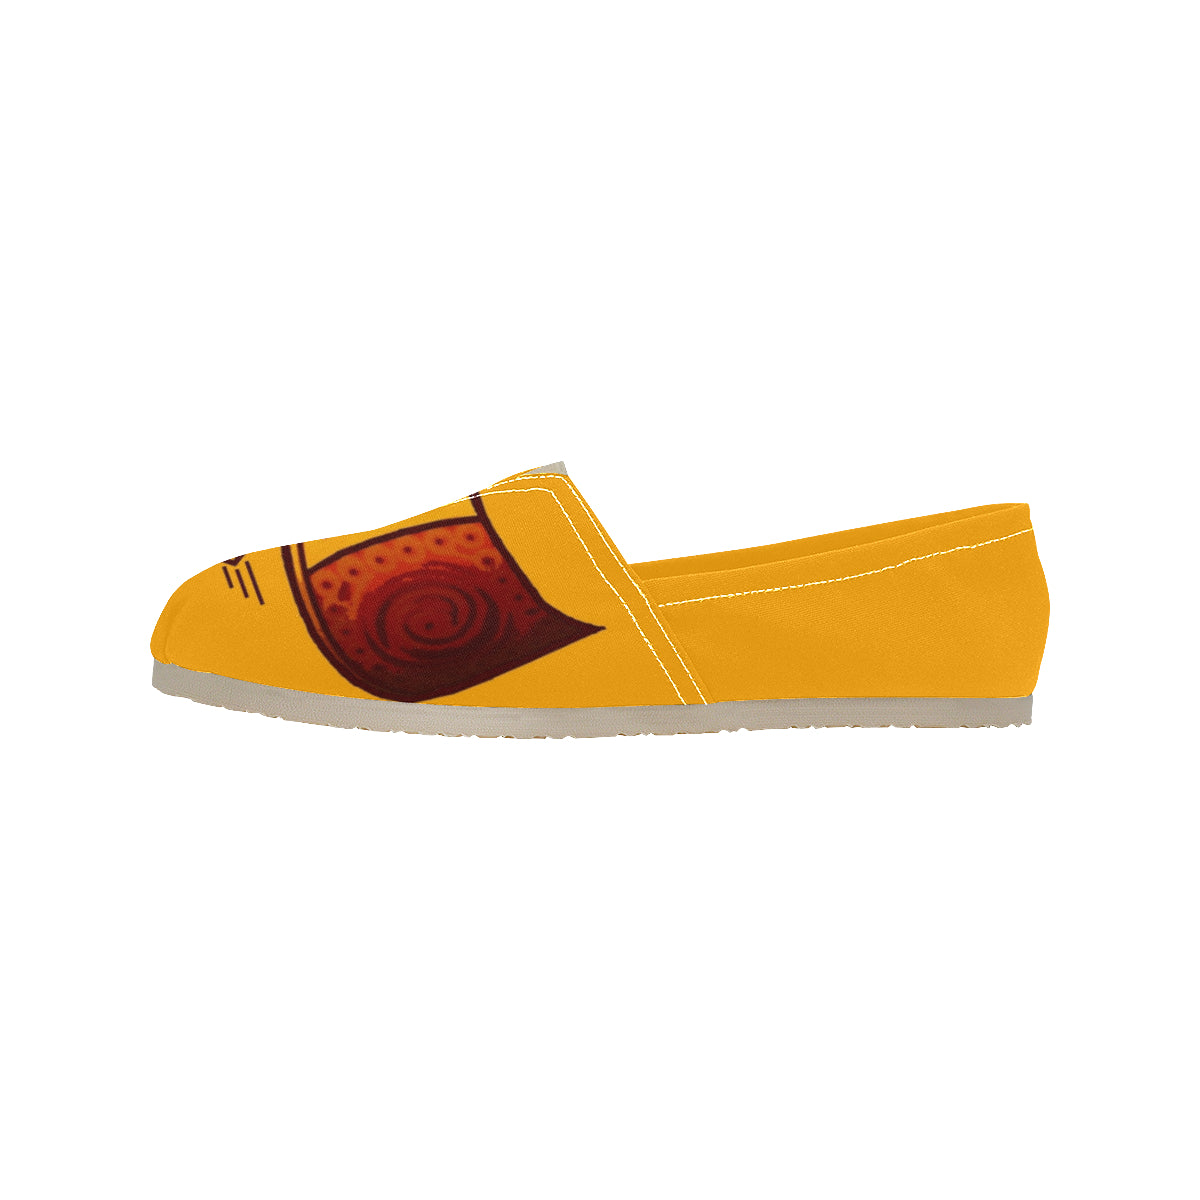 Dutch Clogs Yellow - Casual Canvas Slip-on Shoes